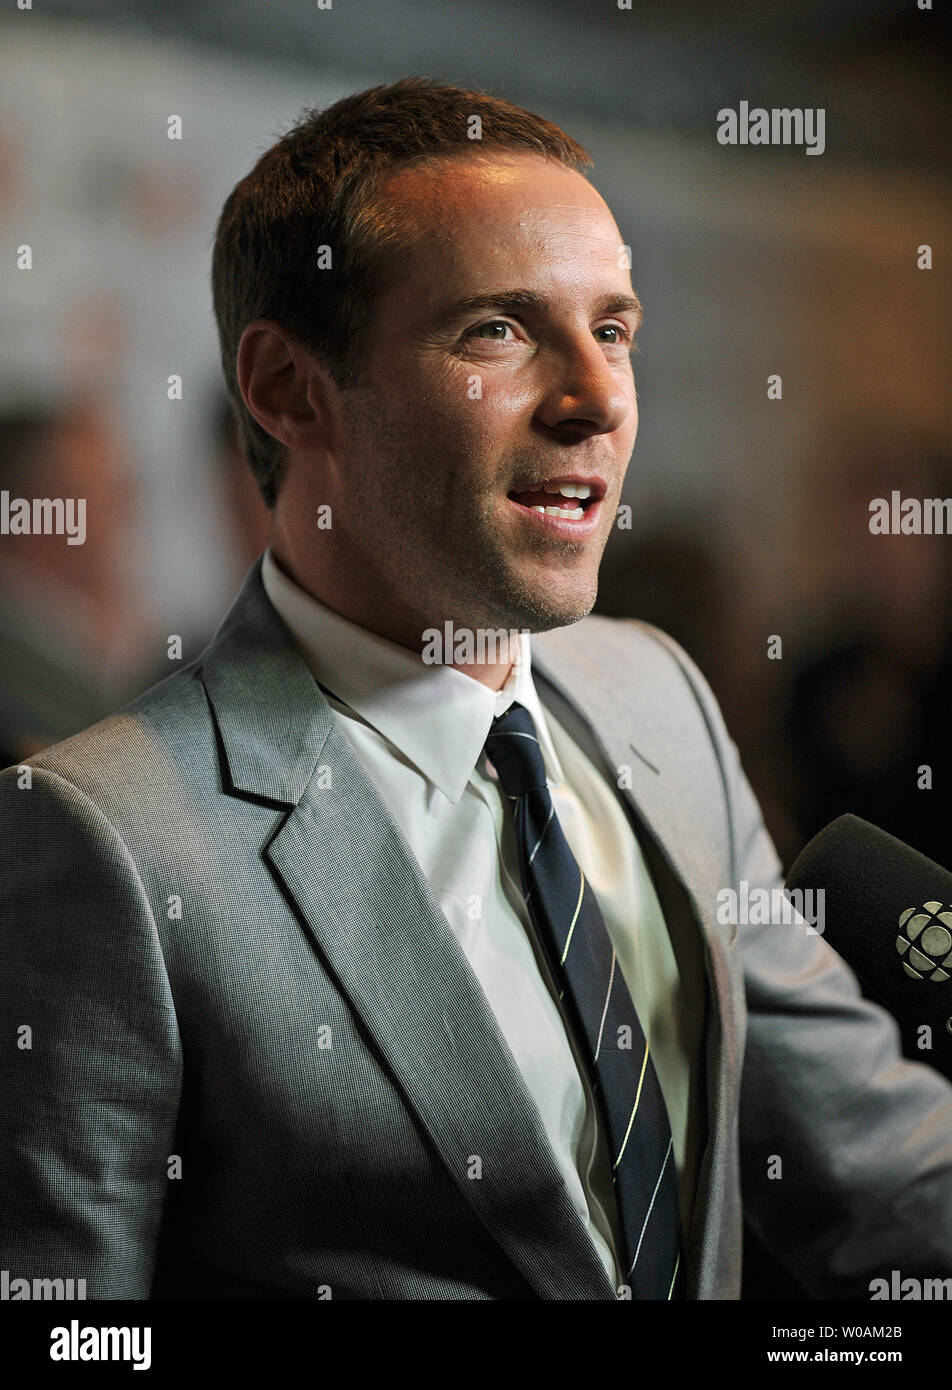 Actor Alessandro Nivola speaks with TV reporters on the red carpet as he arrives for the world premiere gala of 'Janie Jones' at Roy Thomson Hall during the Toronto International Film Festival in Toronto, Canada on September 17, 2010. UPI/Christine Chew Stock Photo